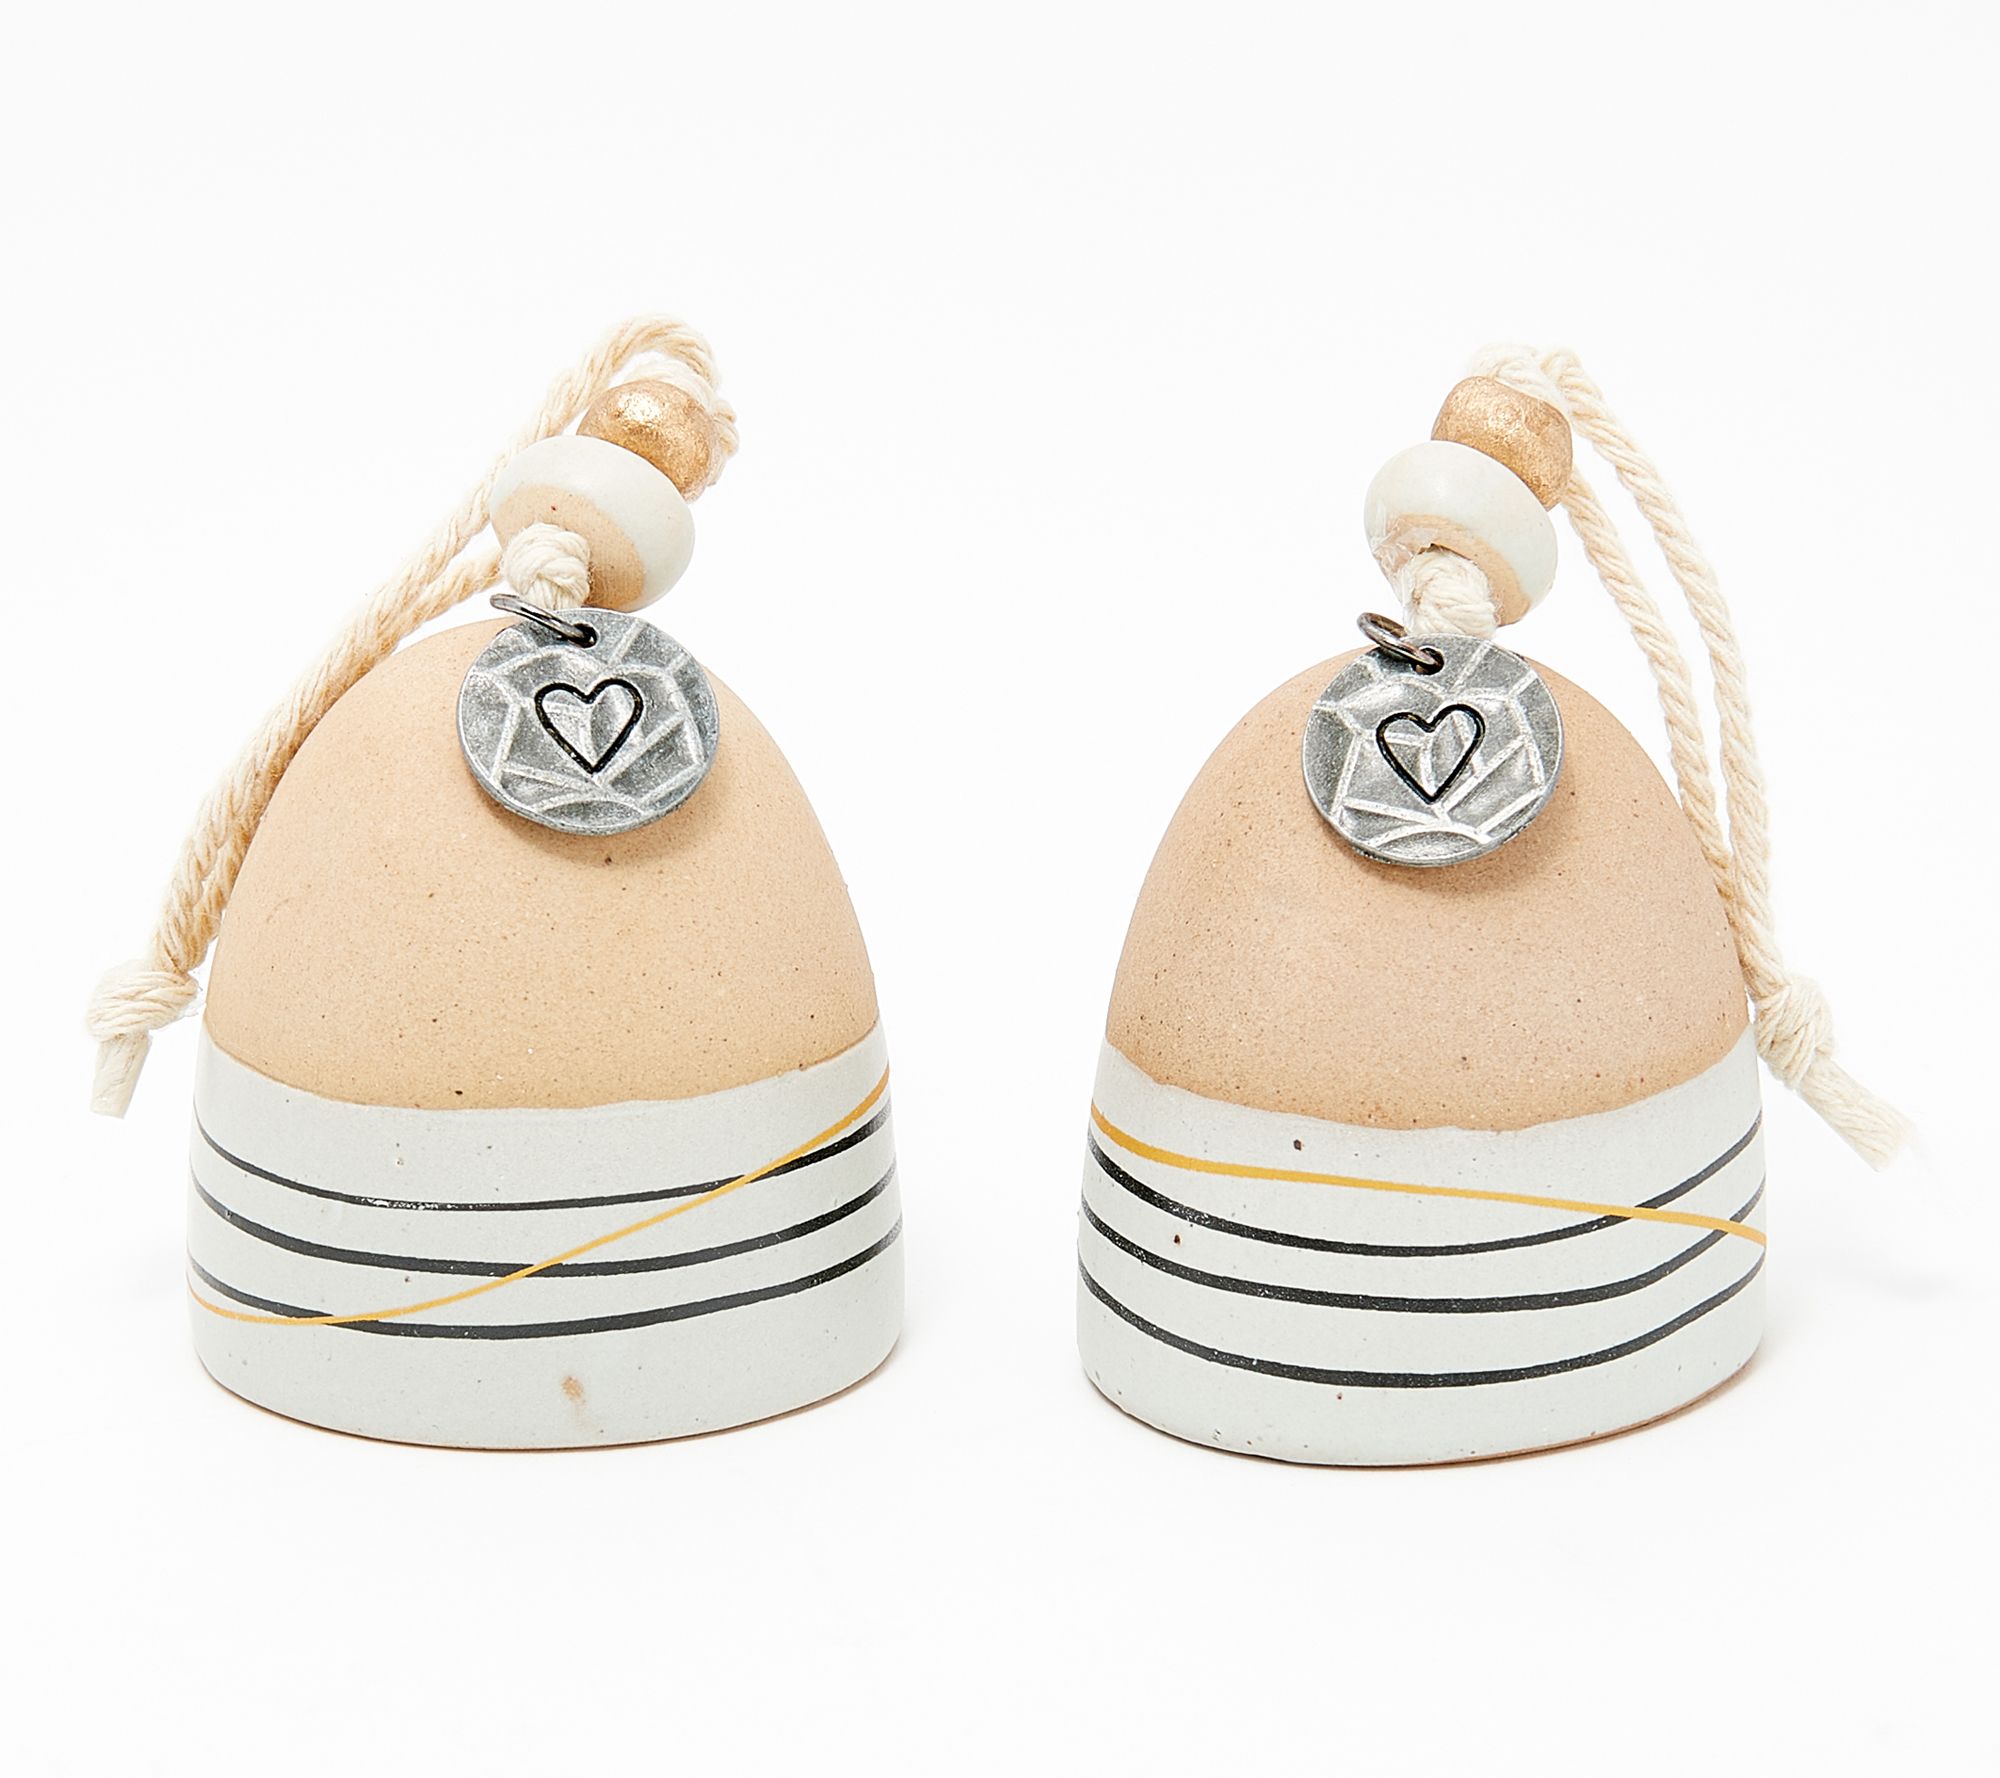 DEMDACO S/2 Stoneware Inspirational Mini Bells in Gift Boxes 